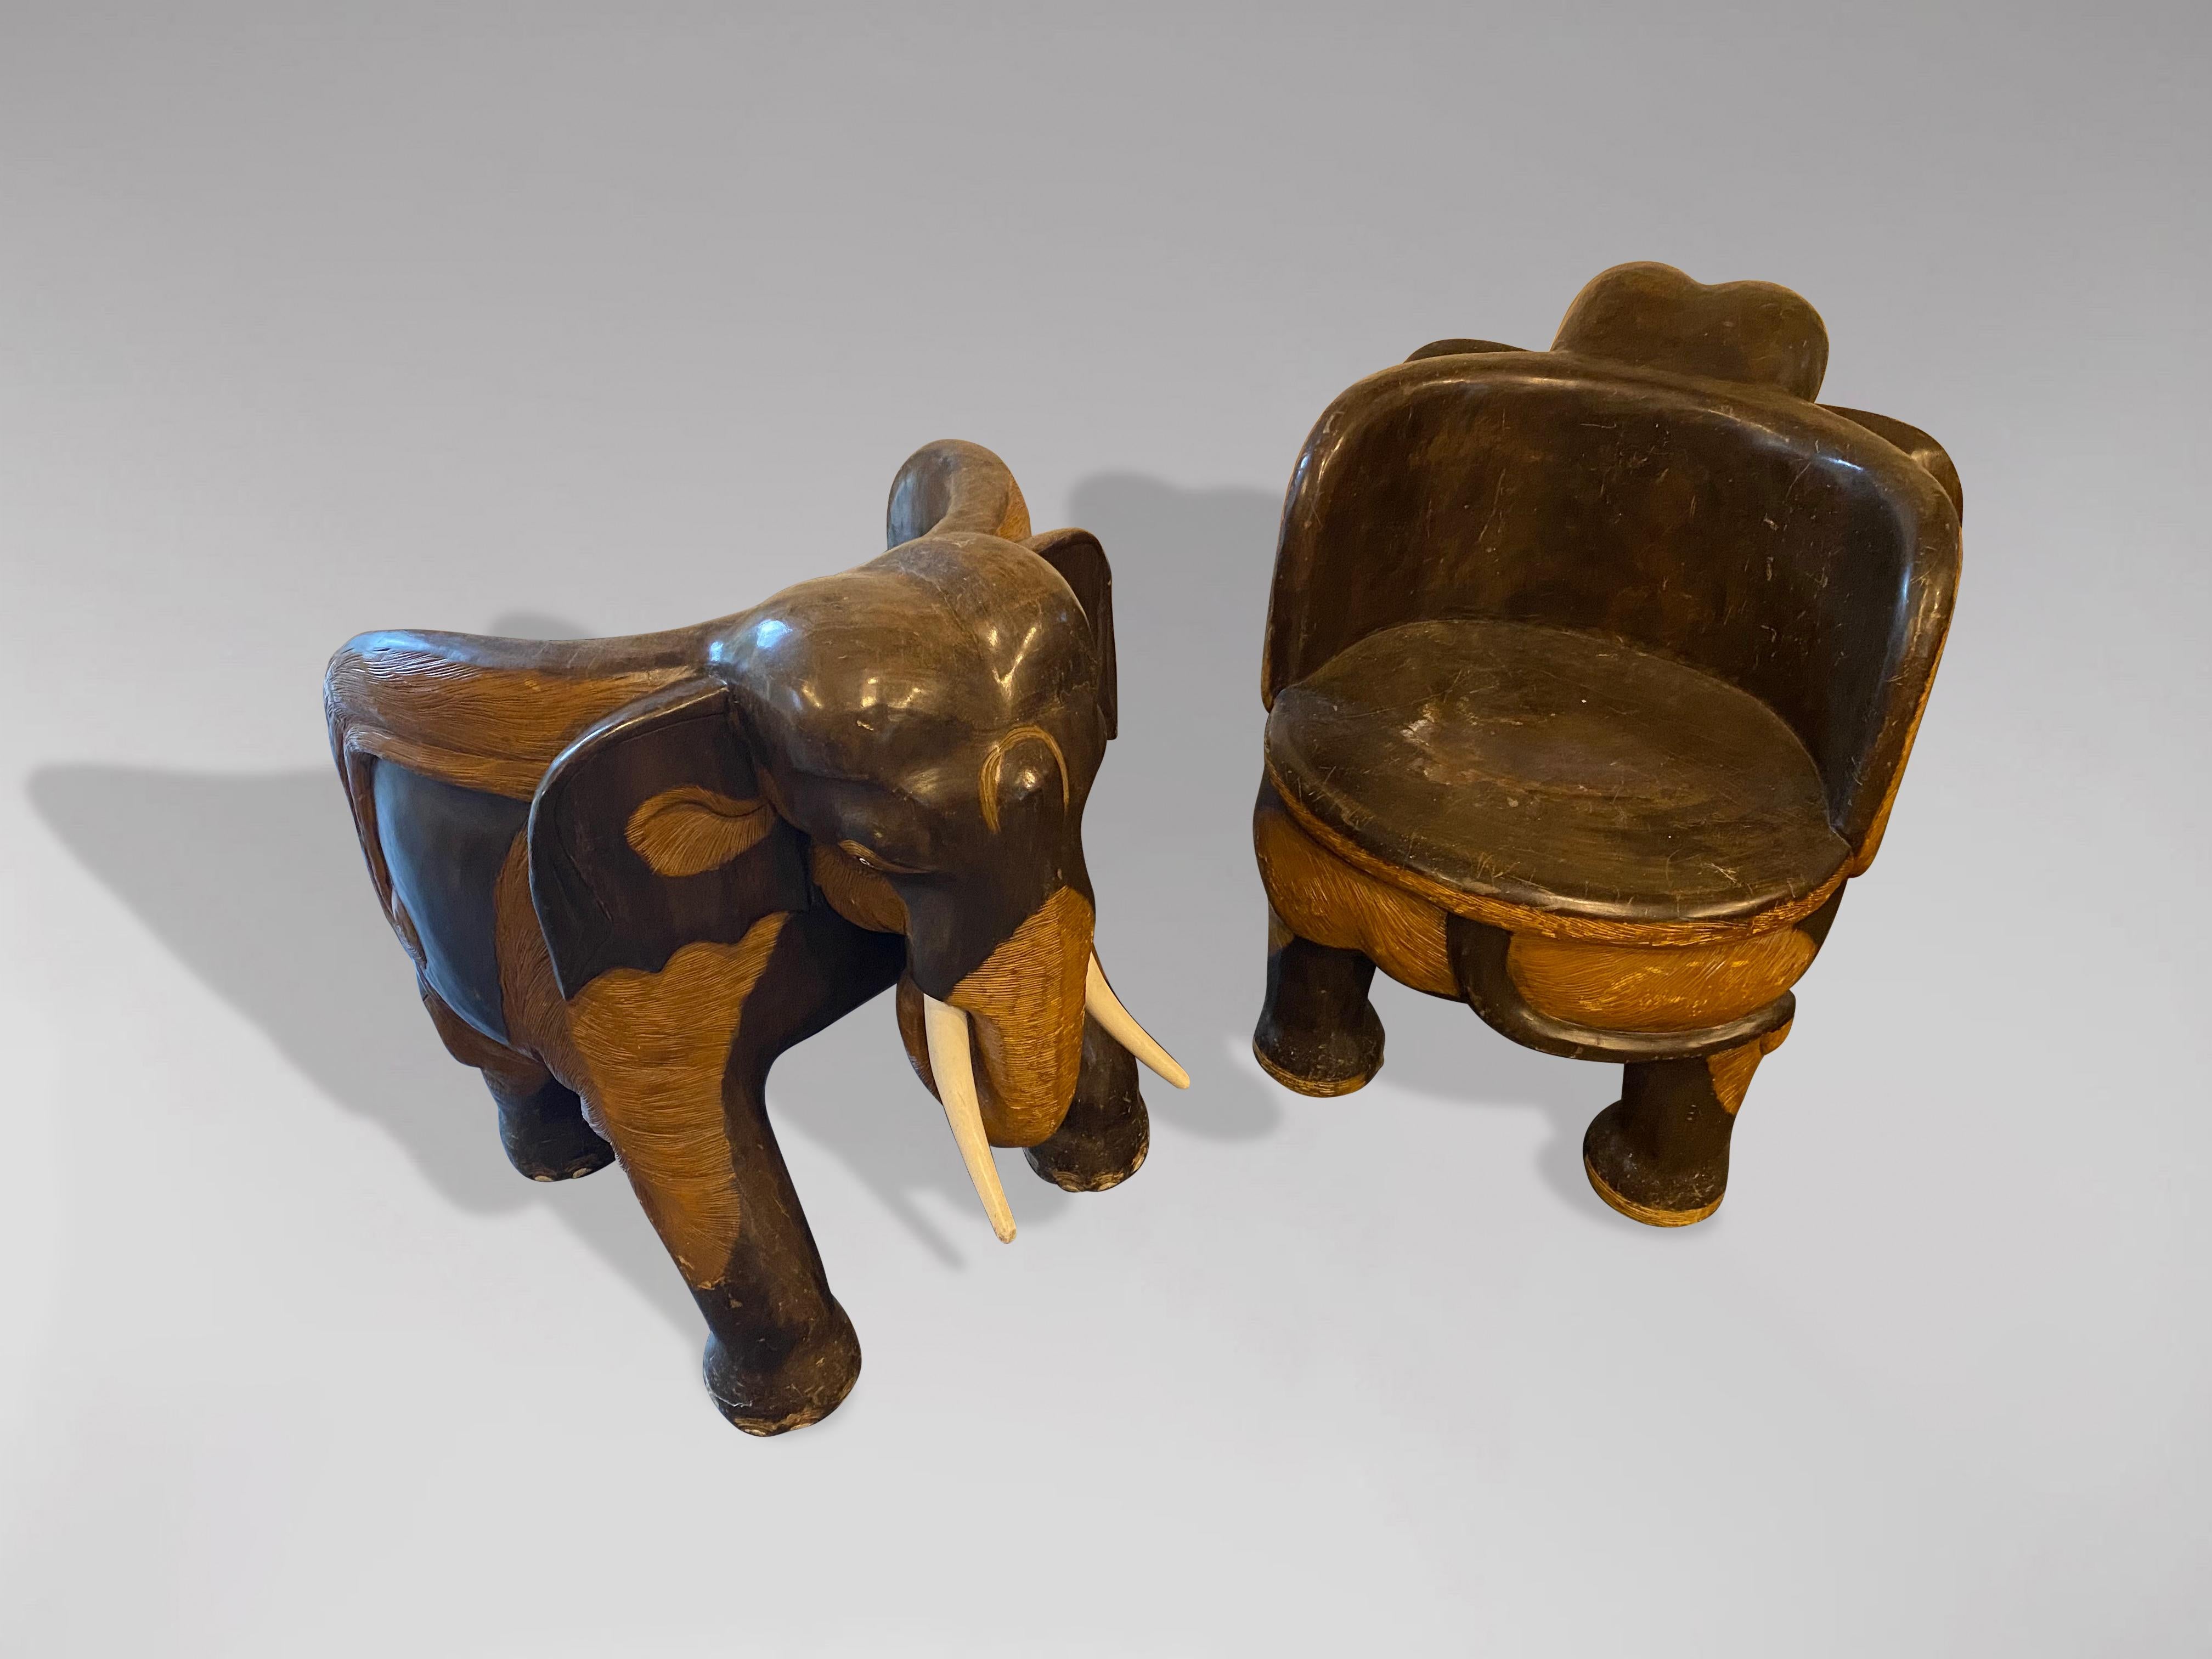 Mid 20th Century Hand Carved Wood Elephant Dining Room Set In Good Condition For Sale In Petworth,West Sussex, GB